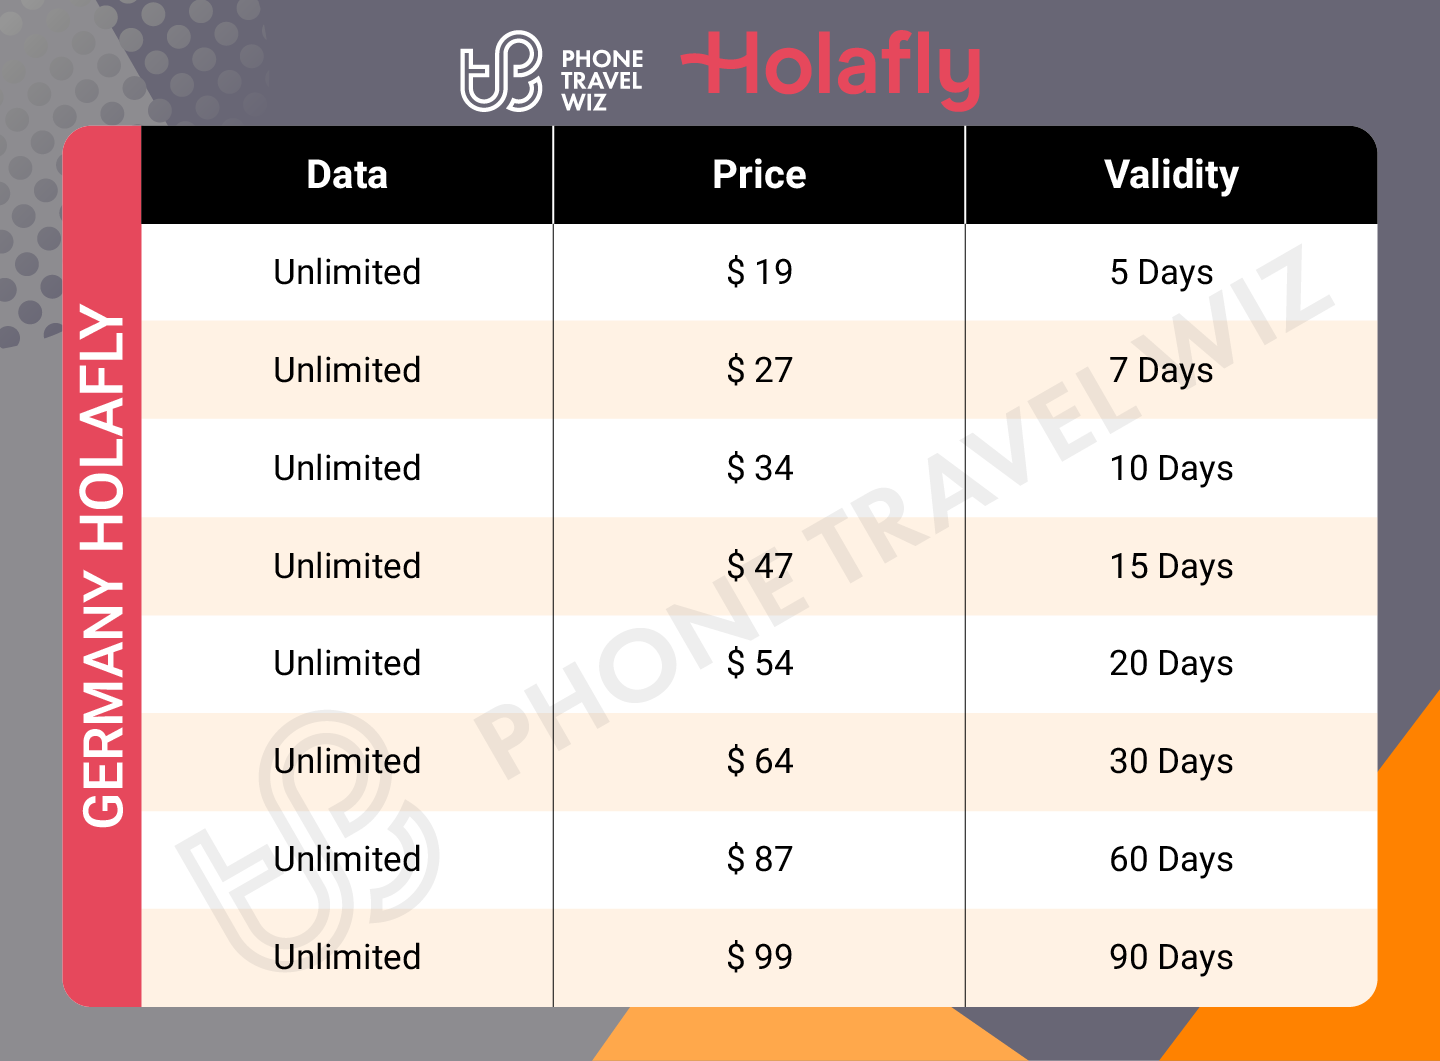 Holafly Germany eSIM Price & Data Details Infographic by Phone Travel Wiz